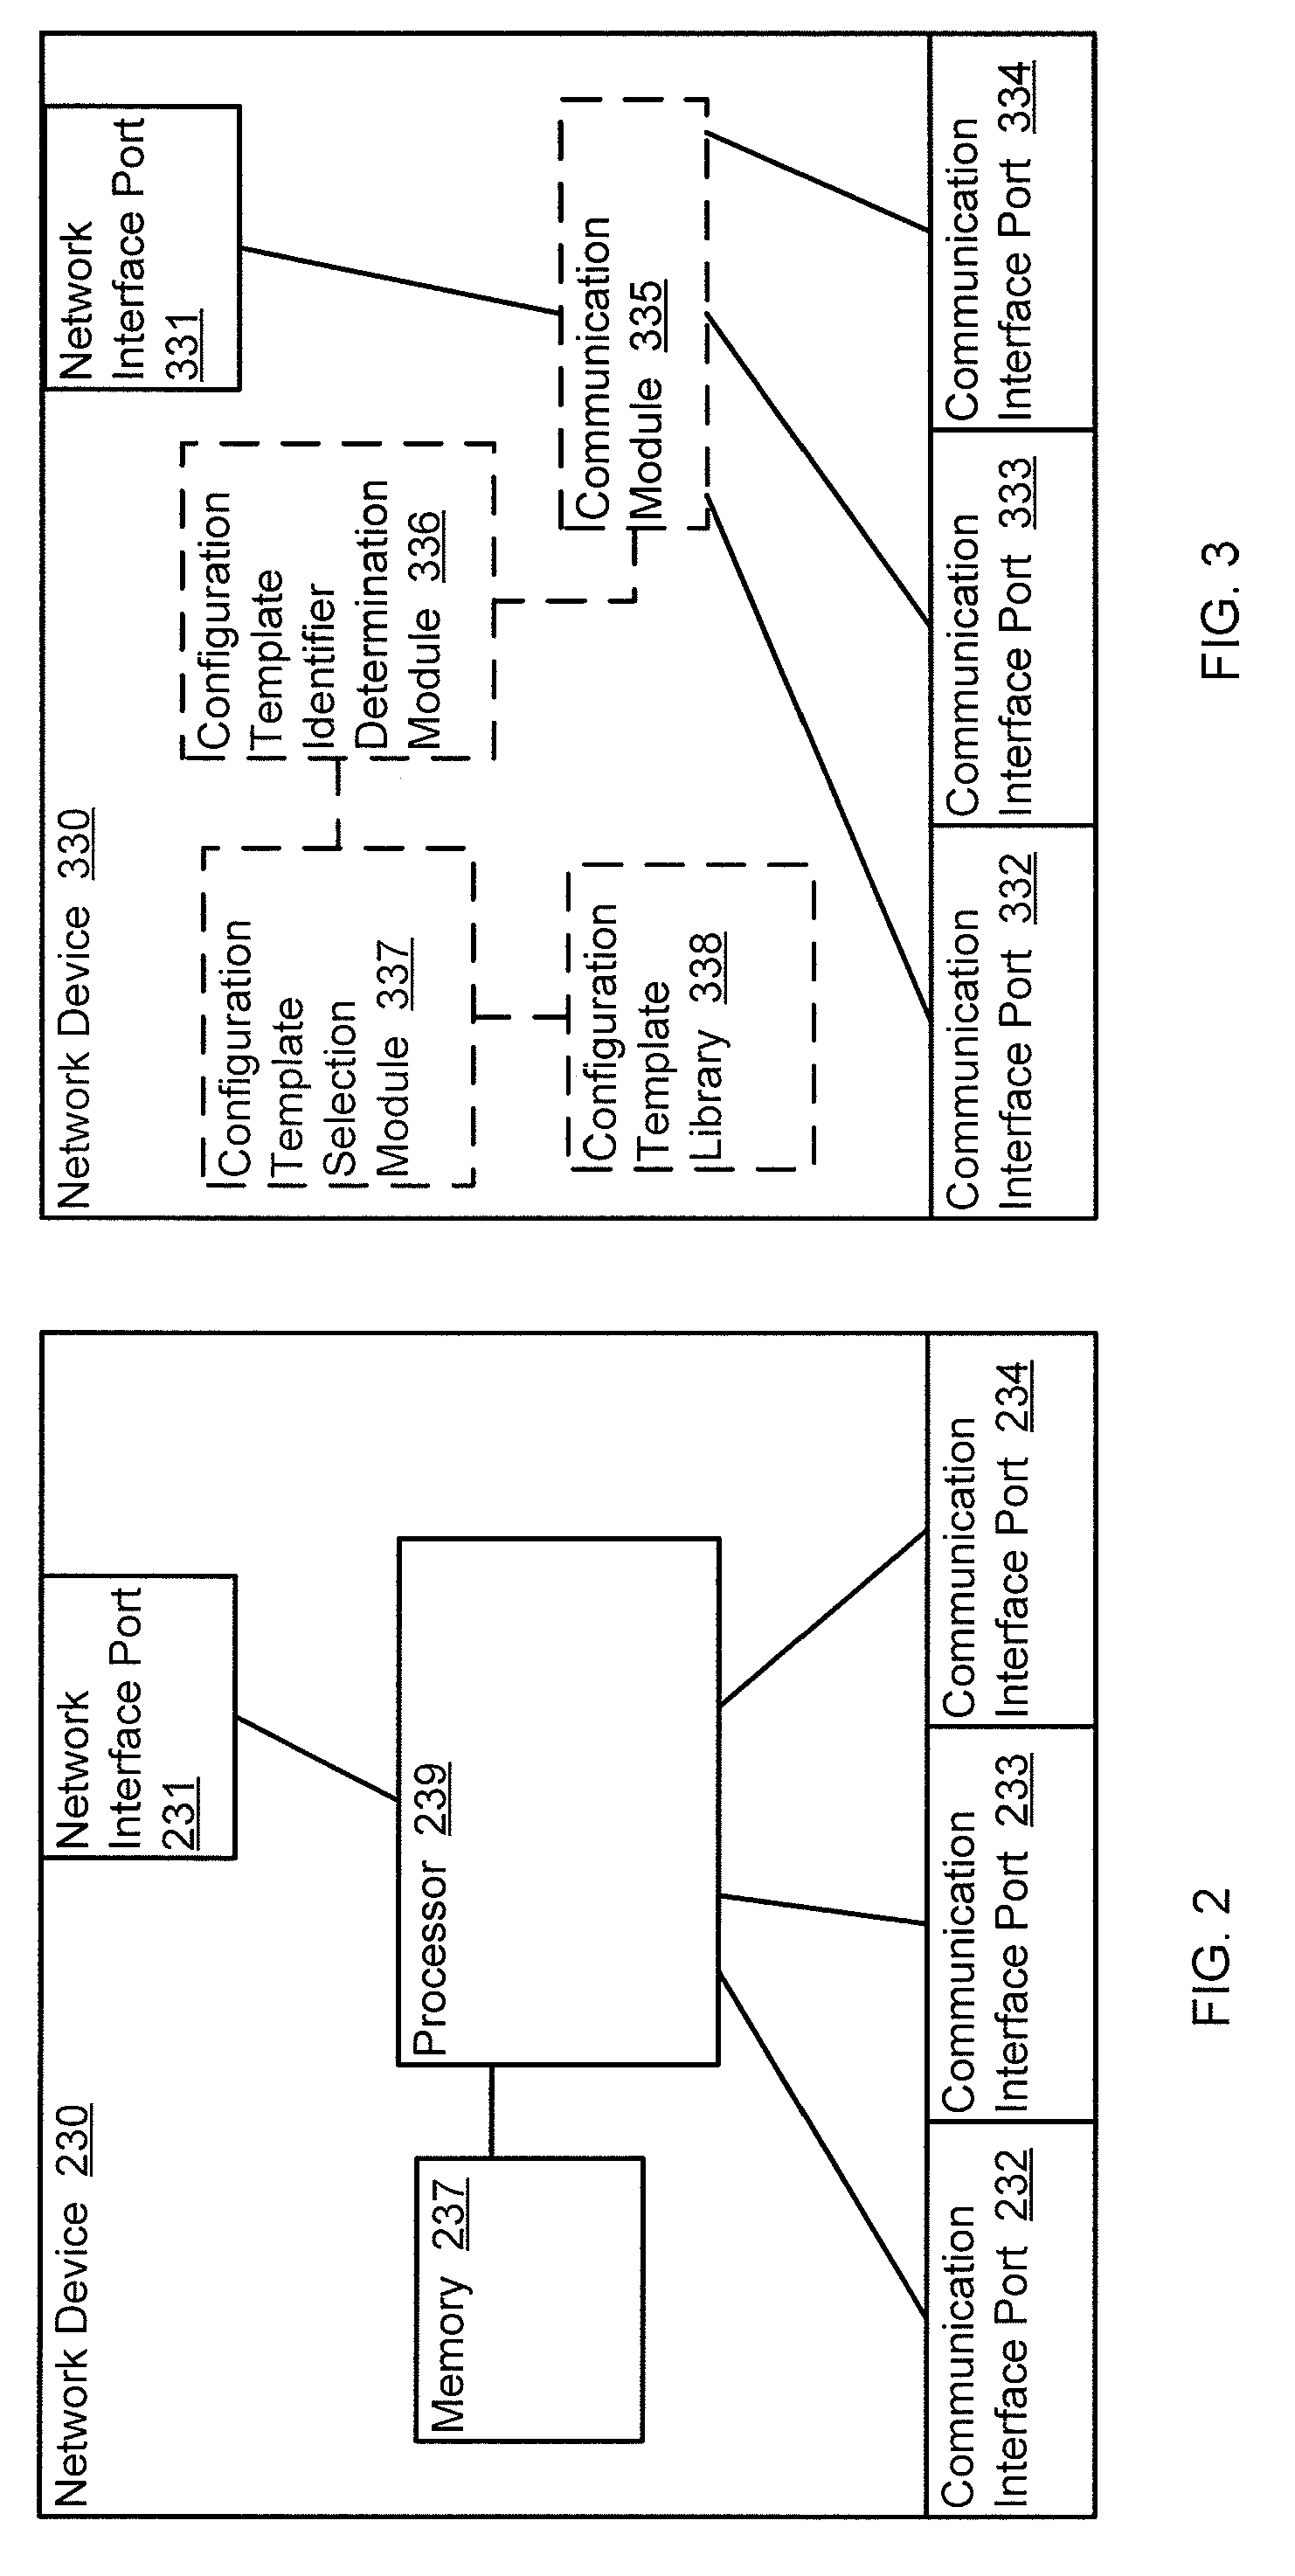 Methods and apparatus for distributed dynamic network provisioning